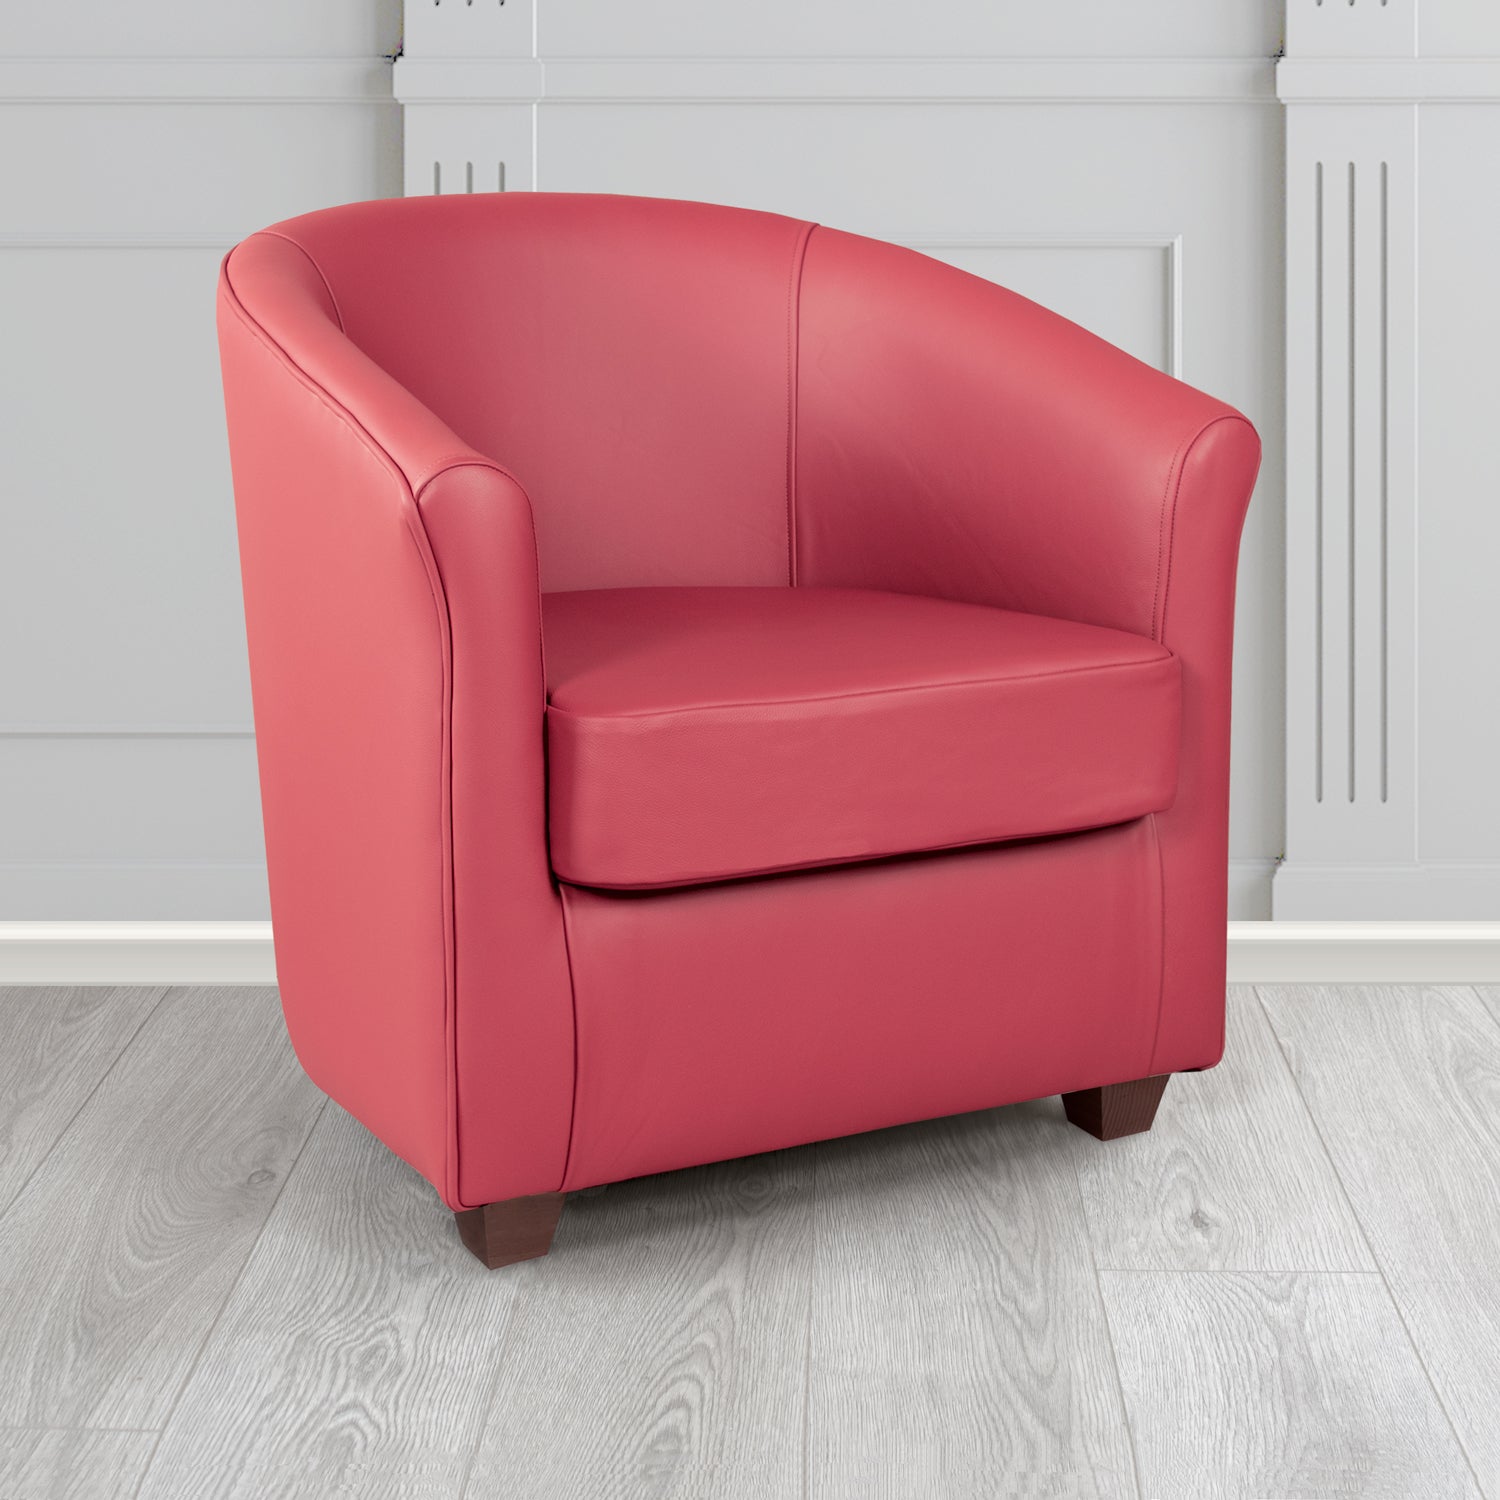 Cannes Shelly Velvet Red Crib 5 Genuine Leather Tub Chair - The Tub Chair Shop